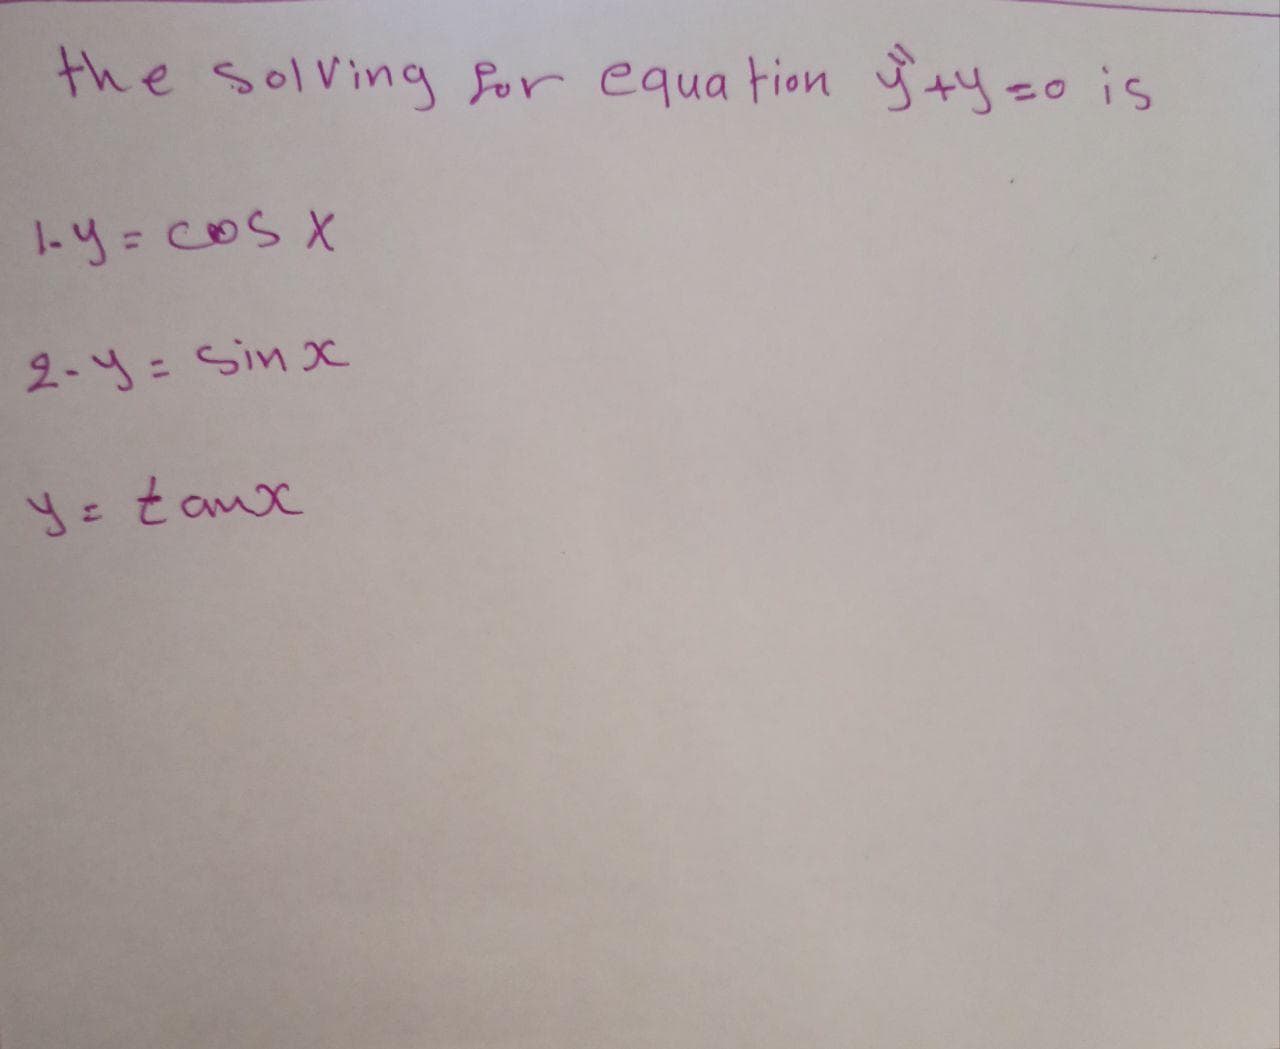 the solving for equa tion ty=o is
1-y= COSX
%3D
2-y= Sin x
%3D
y= tax
